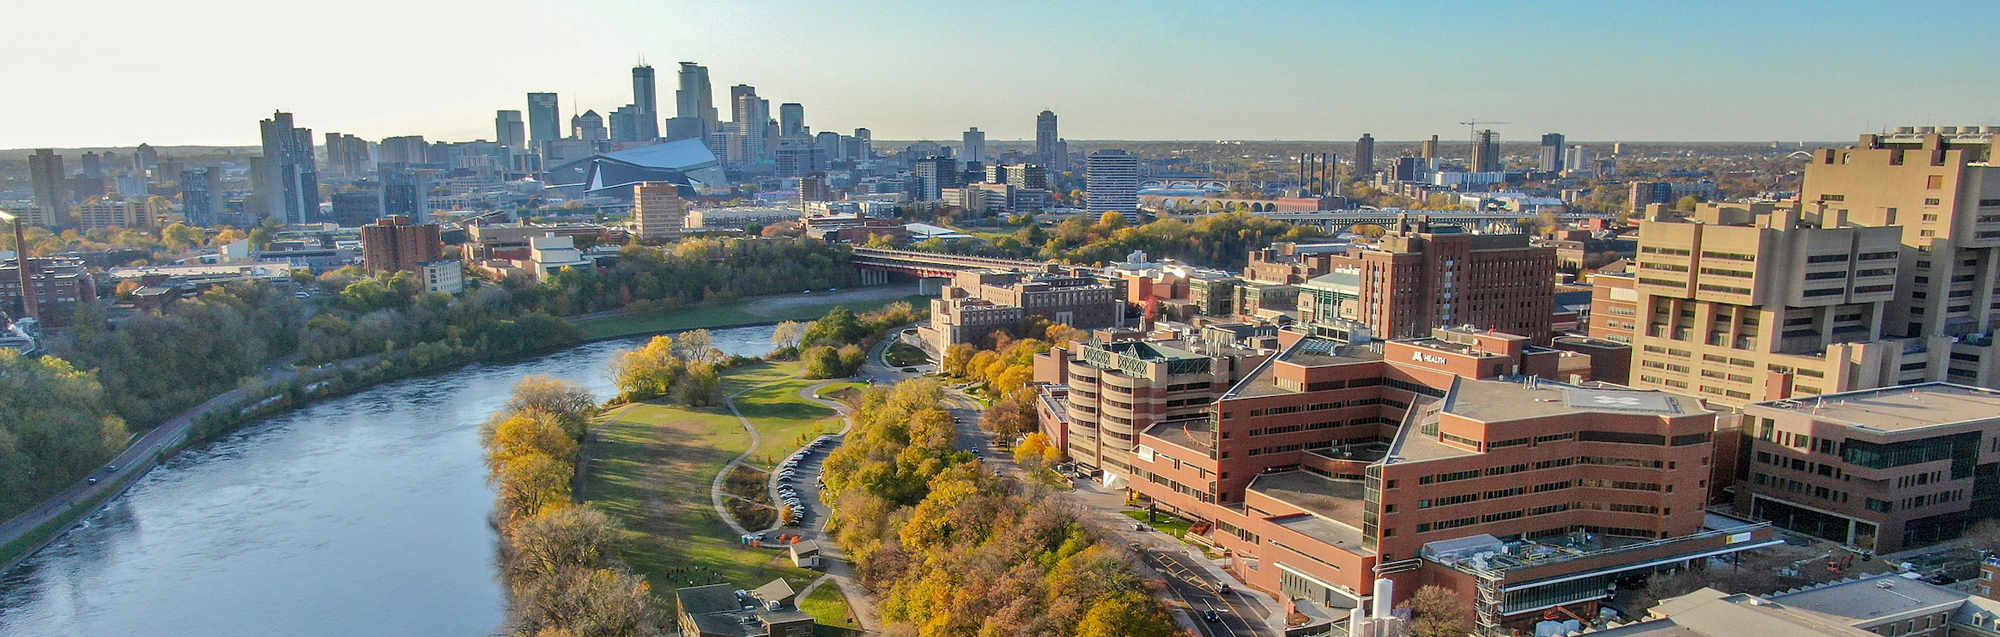 An aerial view of East Bank Campus and downtown Minneapolis.